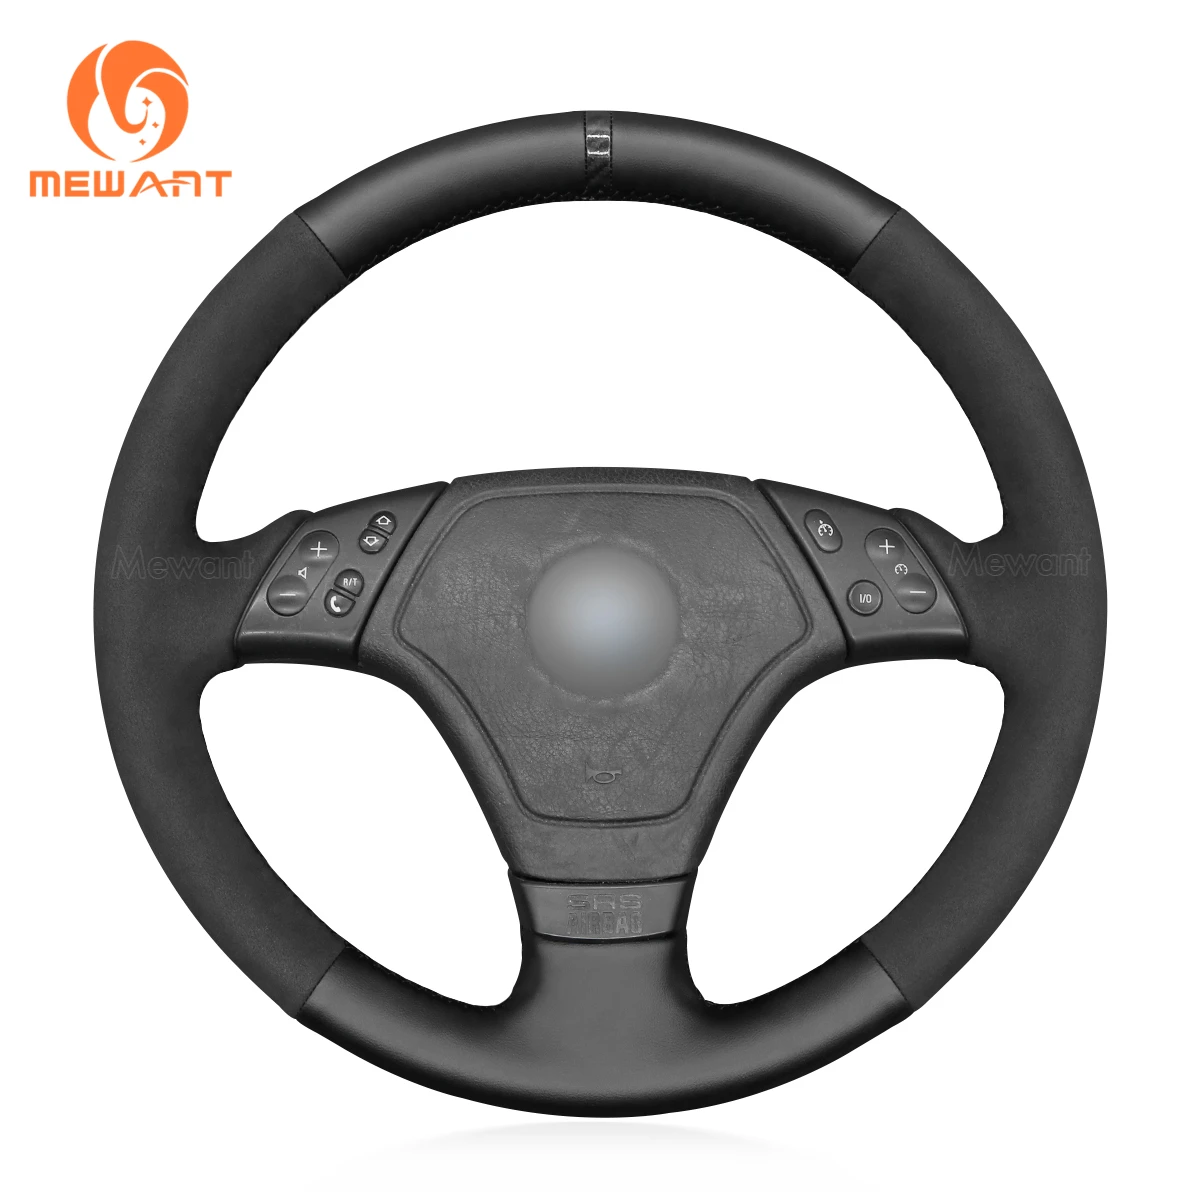 

Hand Sewing Suede Faux Leather Steering Wheel Cover for BMW 3 Series E36 E46 Z3 Roadster 1995 1996 1997 1998 1999 2000